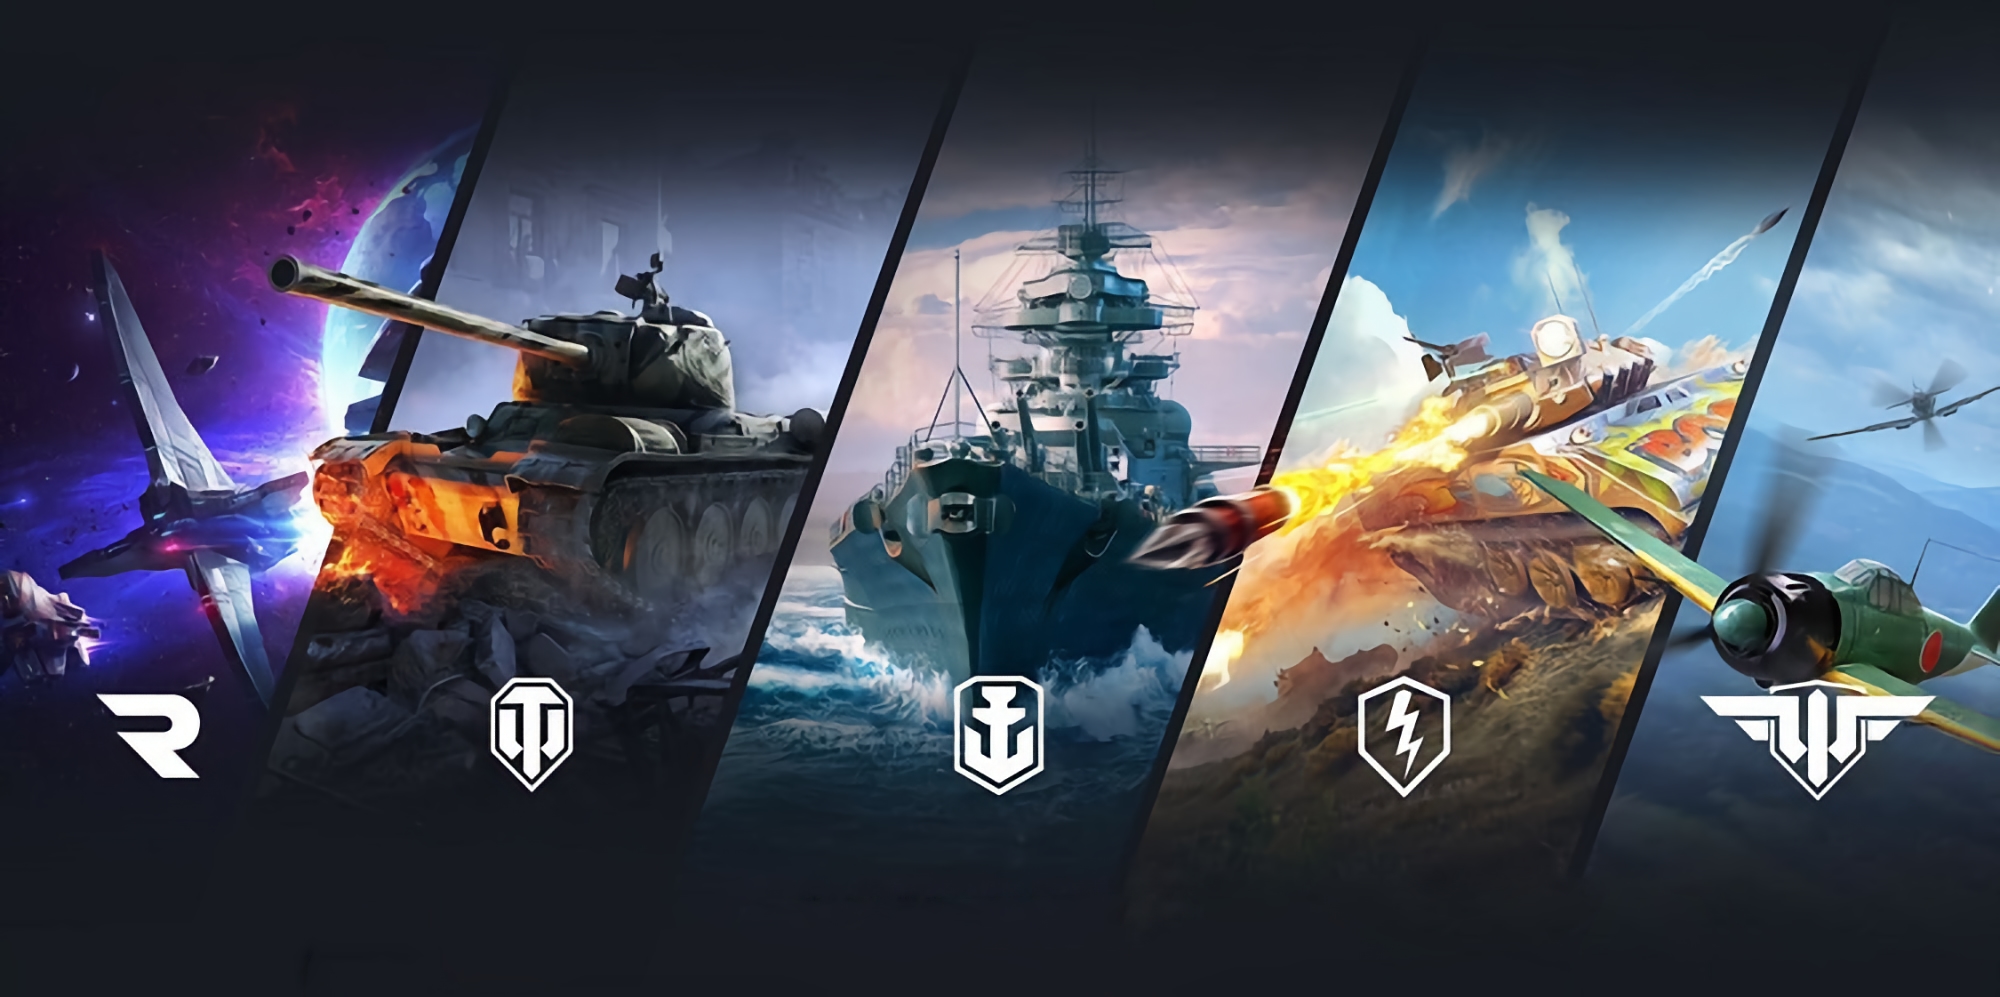 Developers of World of Tanks, World of Warships and World of